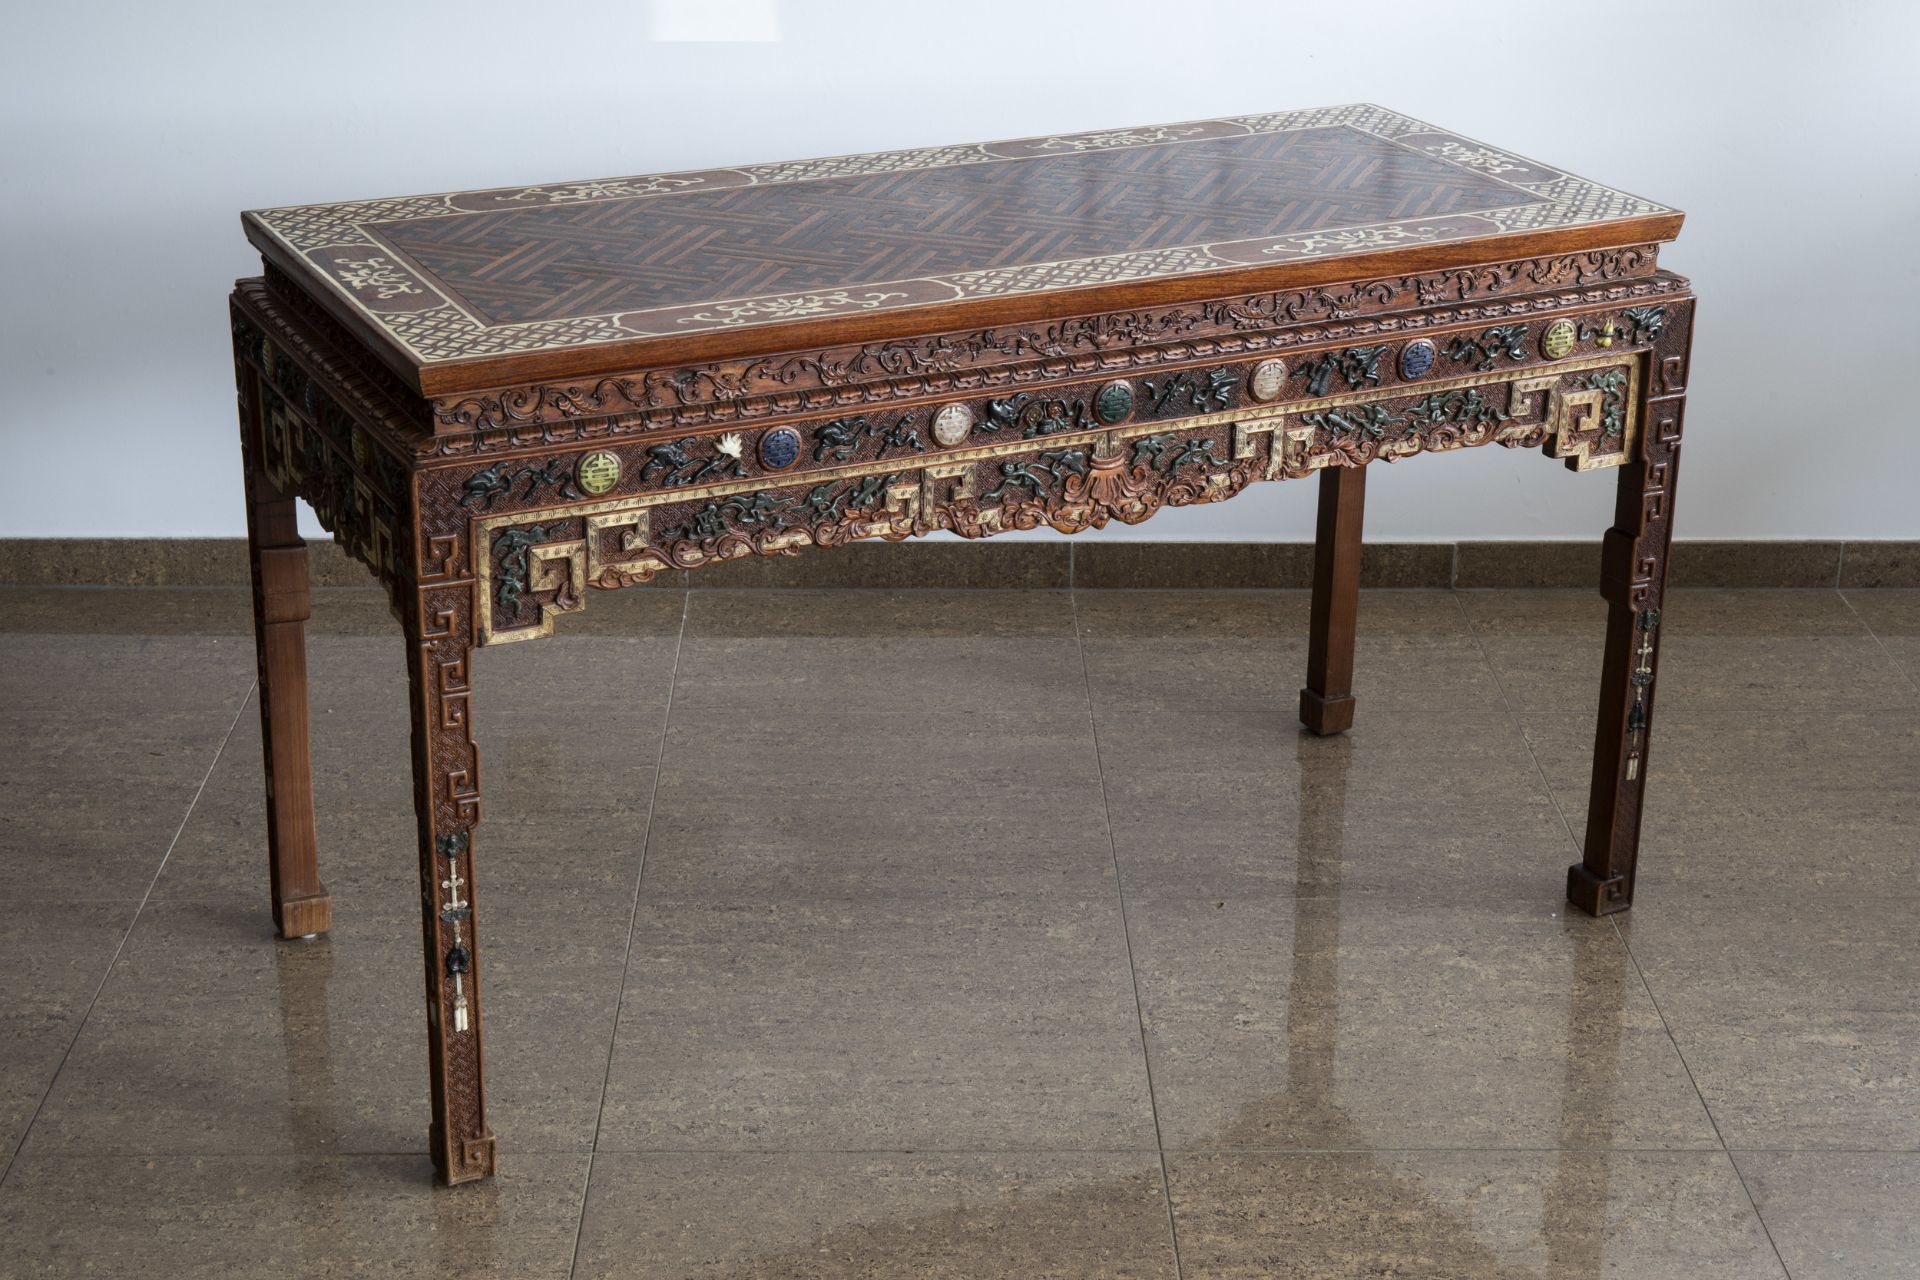 A Chinese bone and hardstone inlaid rectangular wooden table, 20th C. - Image 2 of 7